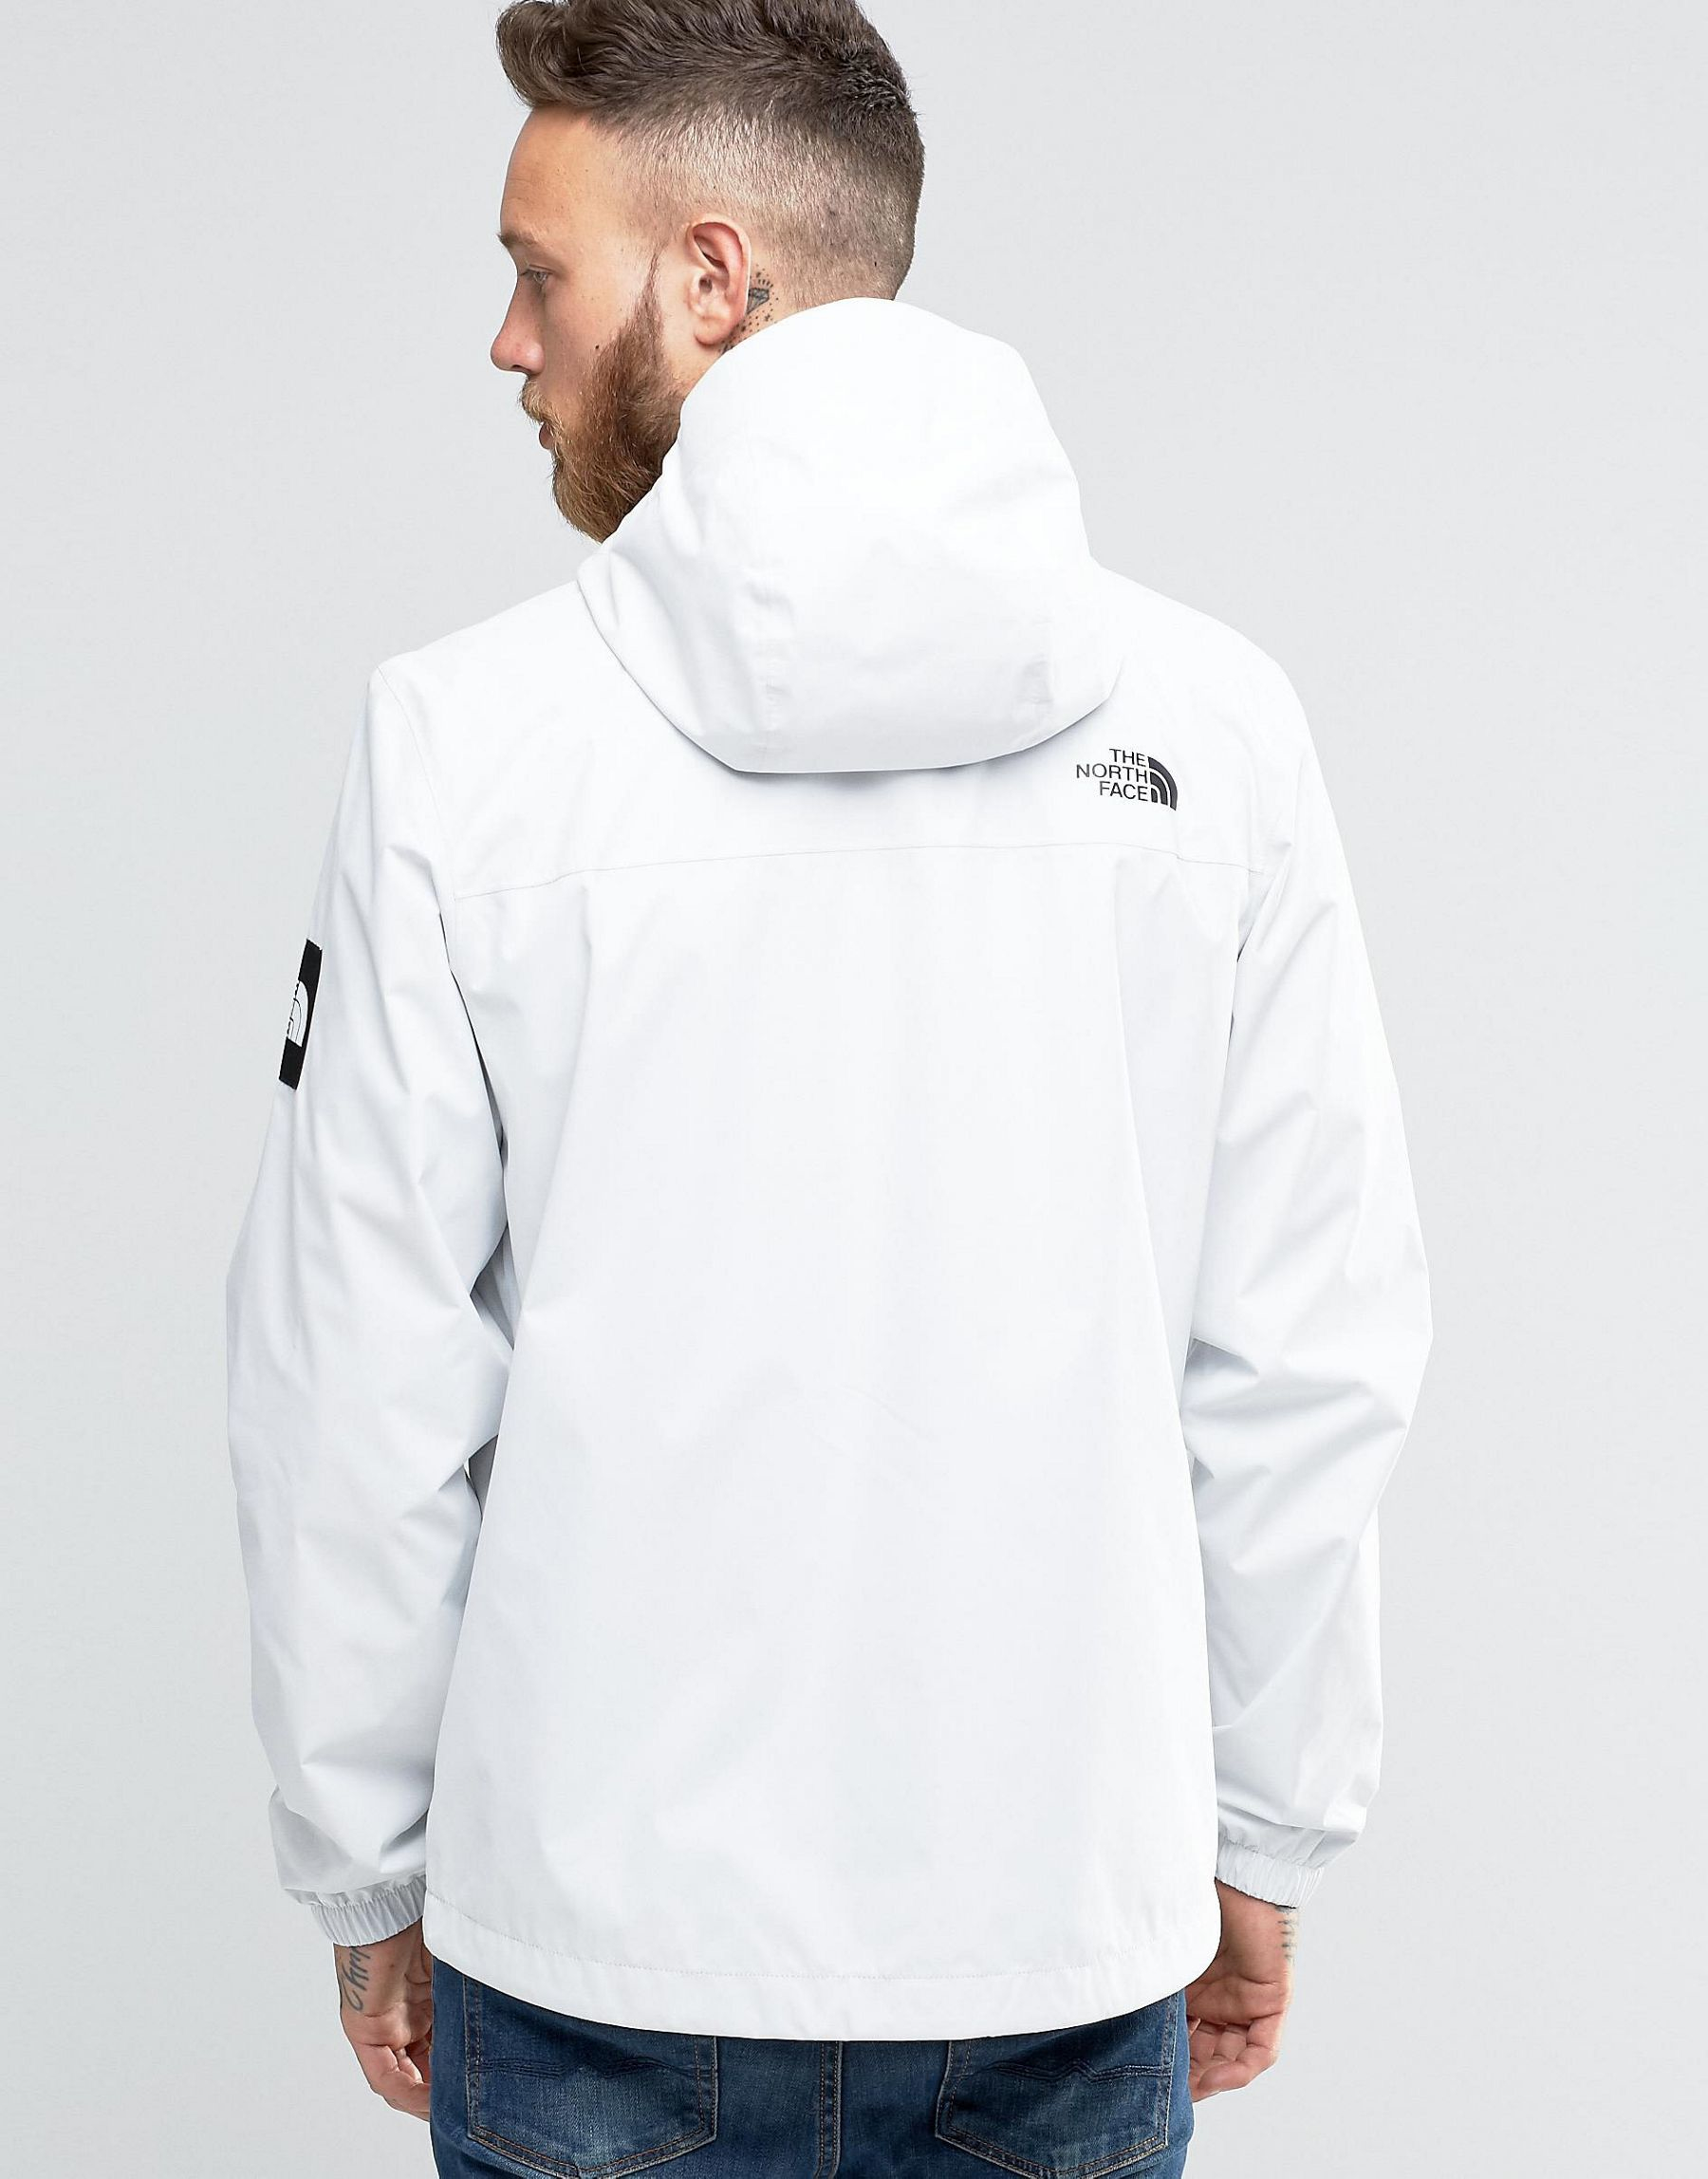 The North Face Synthetic Mountain Q Jacket In White - White for Men - Lyst